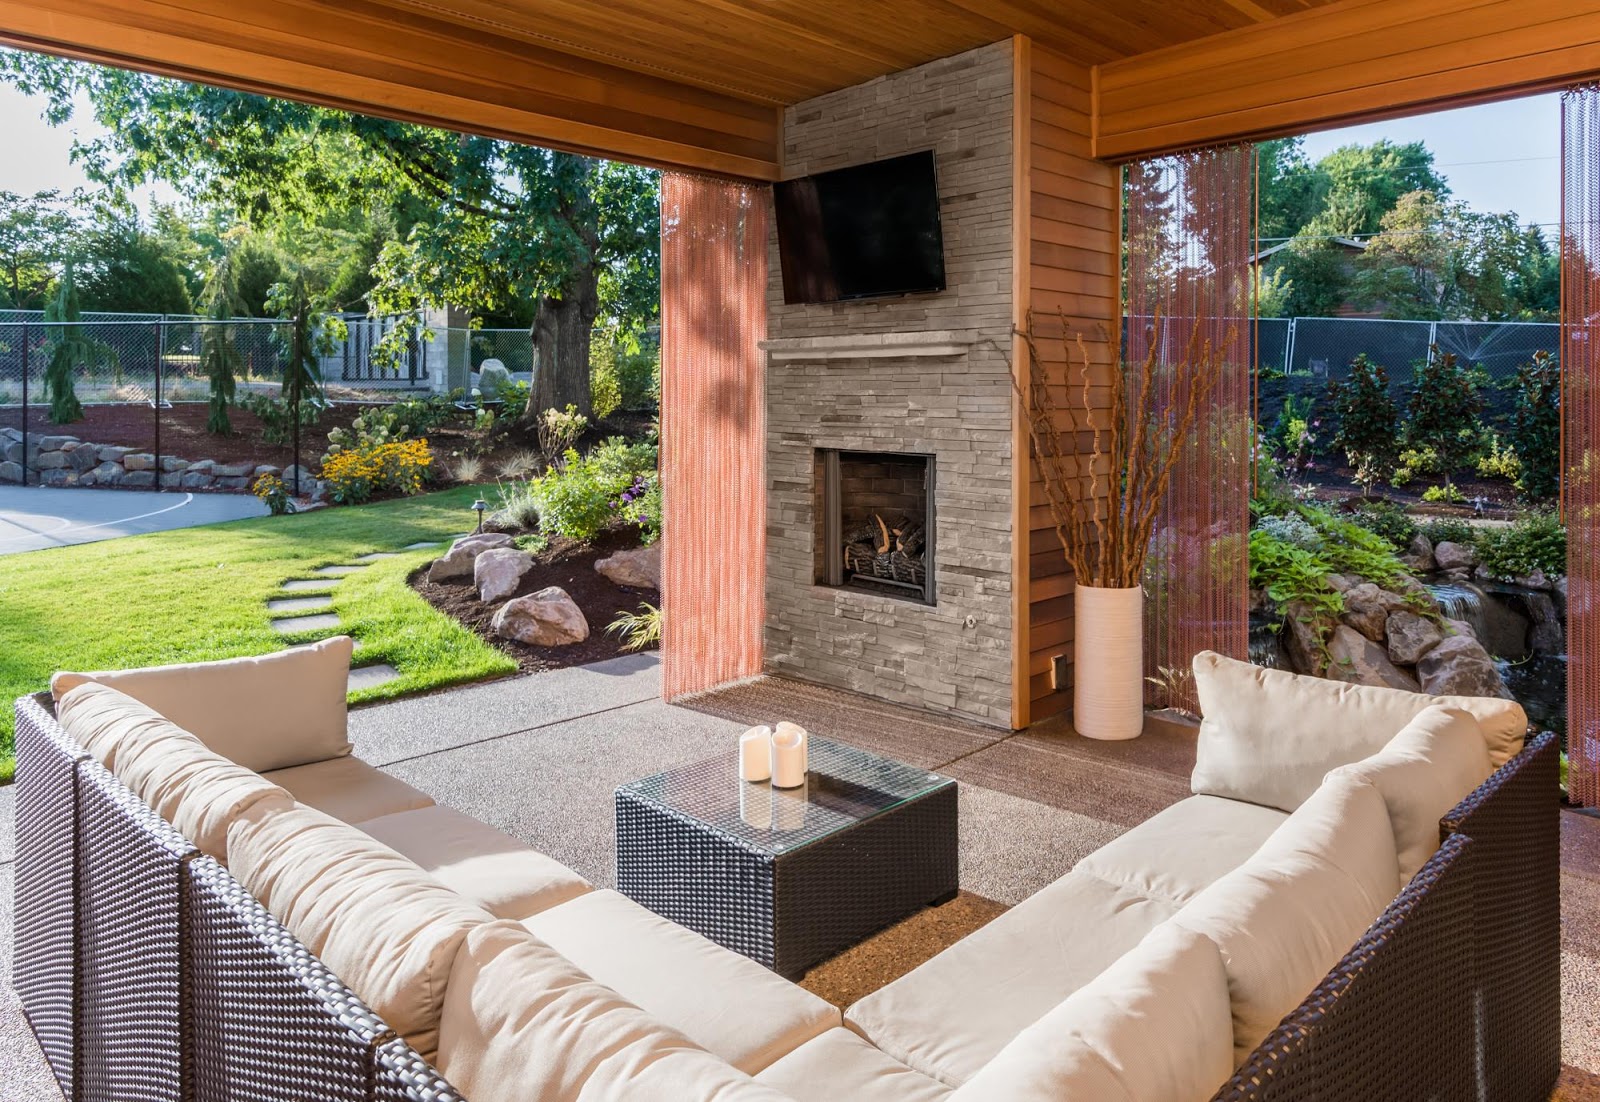 5 Tips for Designing the Perfect Outdoor Space